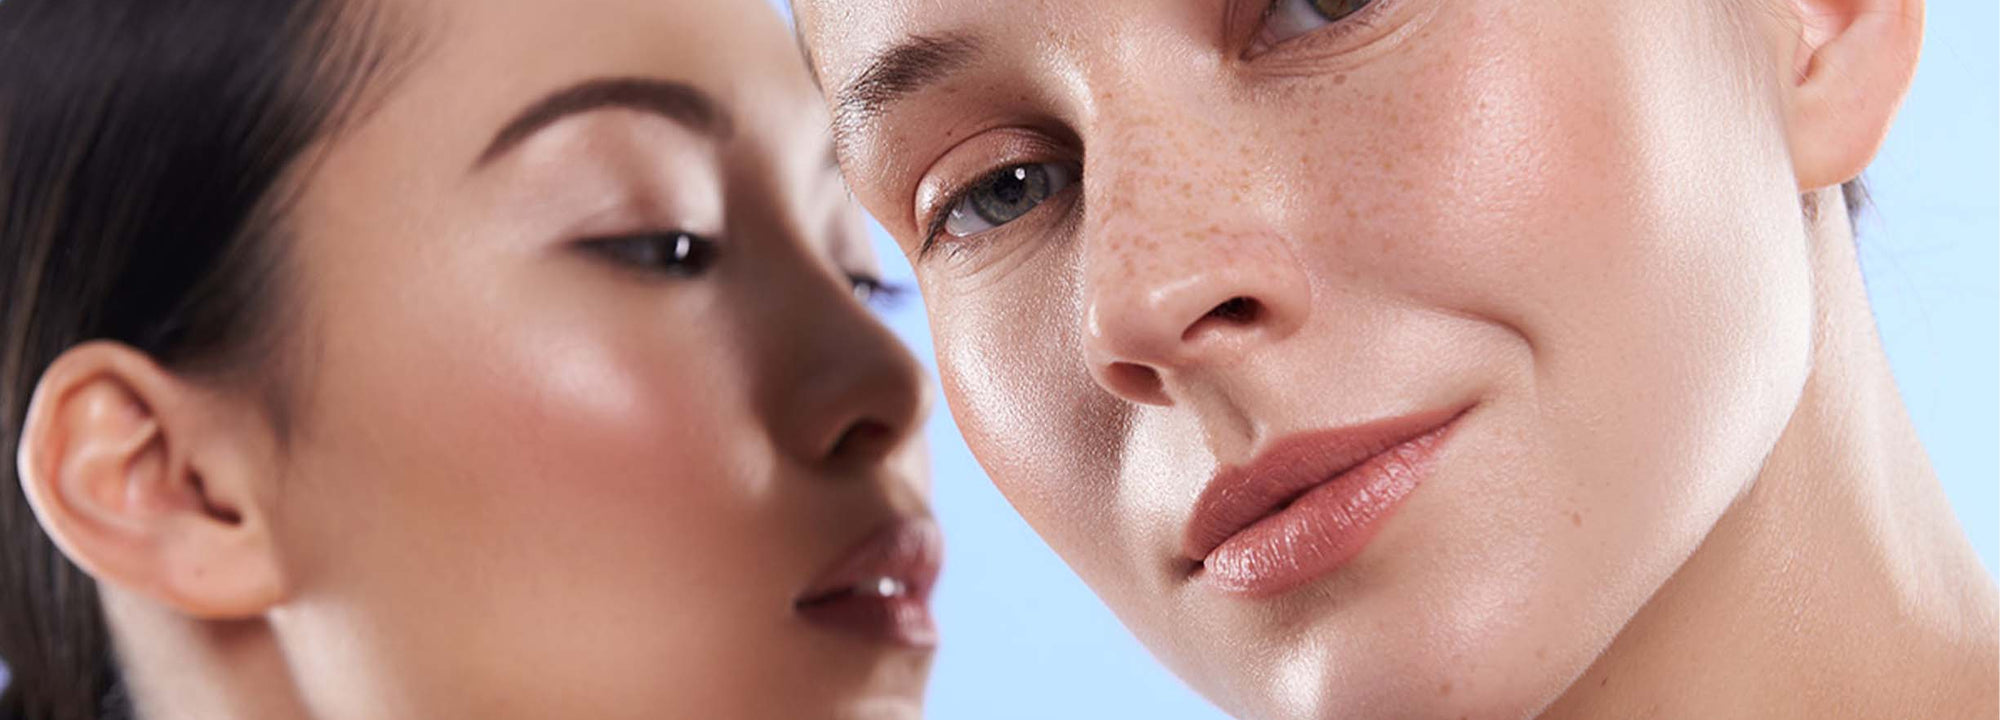 8 Skincare Ingredients That Will Help Fade Those Acne Scars